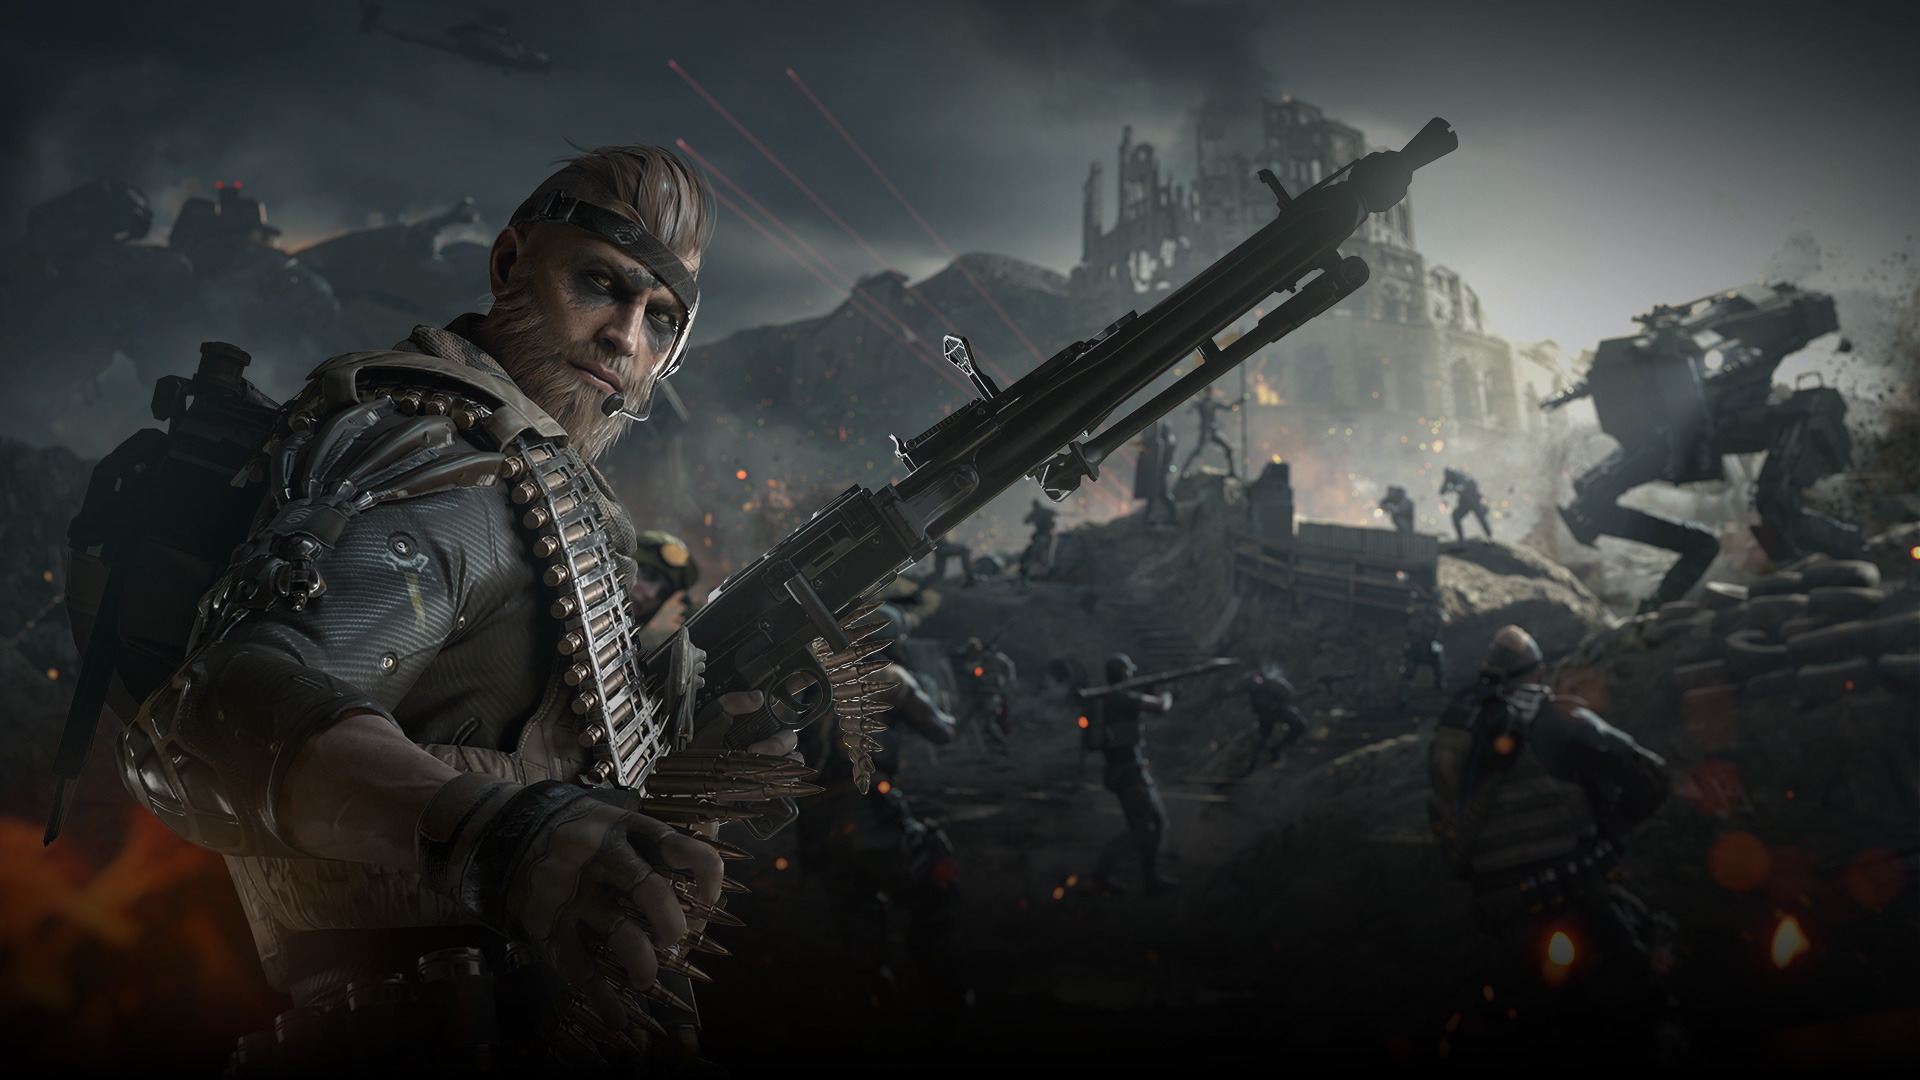 A soldier makes his way across a crowded battlefield covered in debris and vehicles.